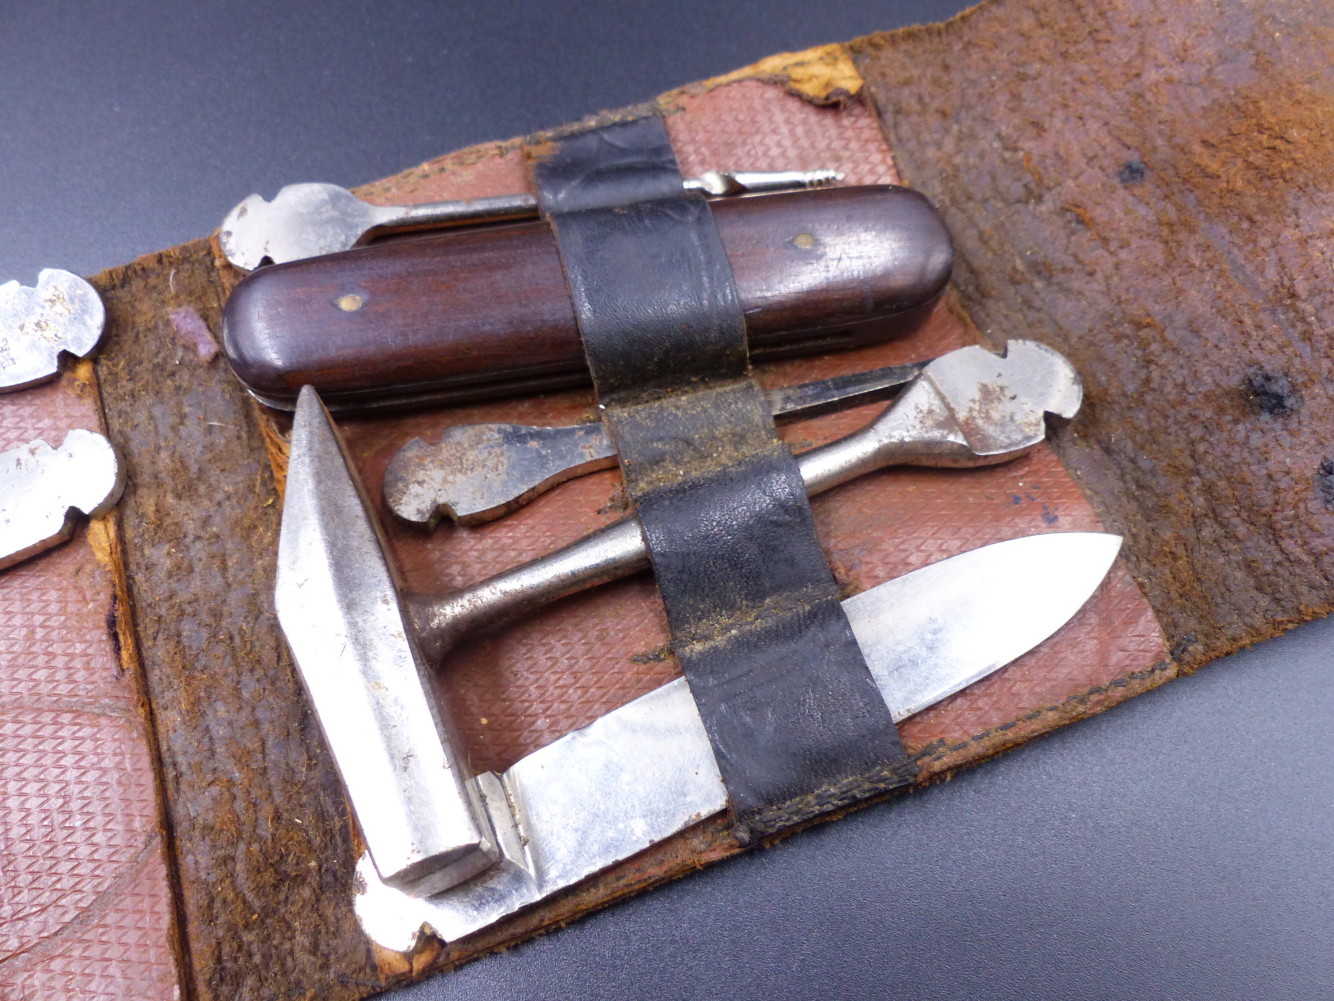 A BONZA TYPE LEATHER CASED TOOL KIT CONTAINING VARIOUS TOOLS AND IMPLEMENTS. - Image 3 of 9